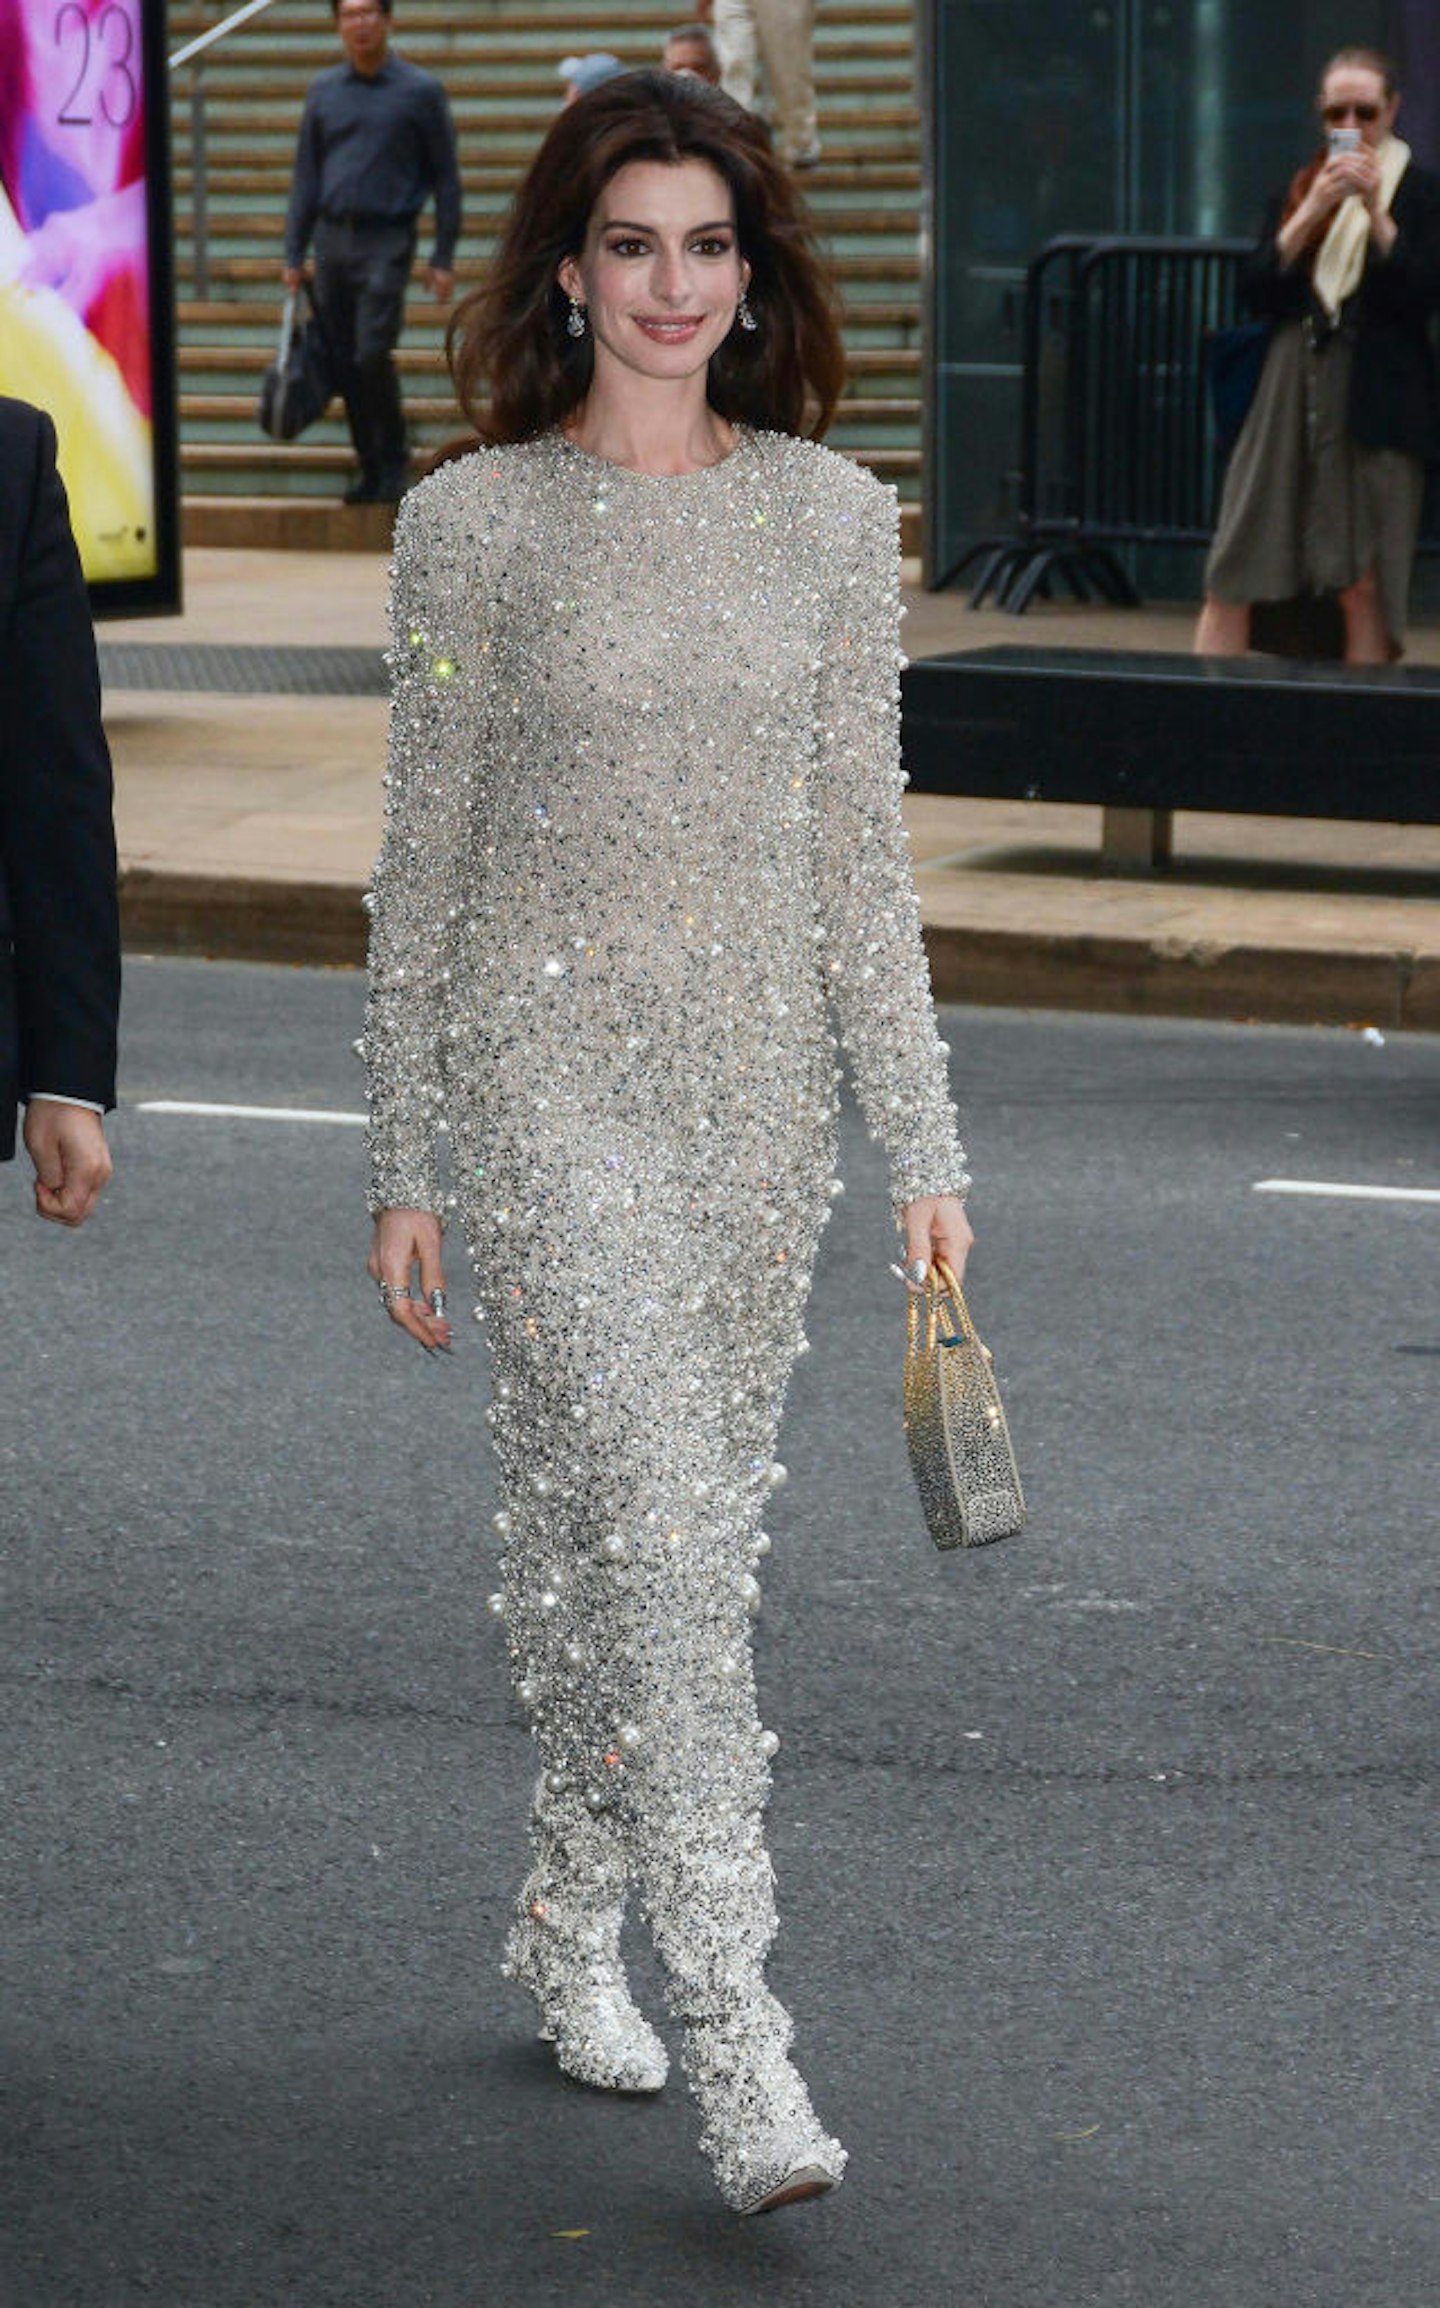 Anne Hathaway just re-wore Claudia Schiffer's Versace finale gown